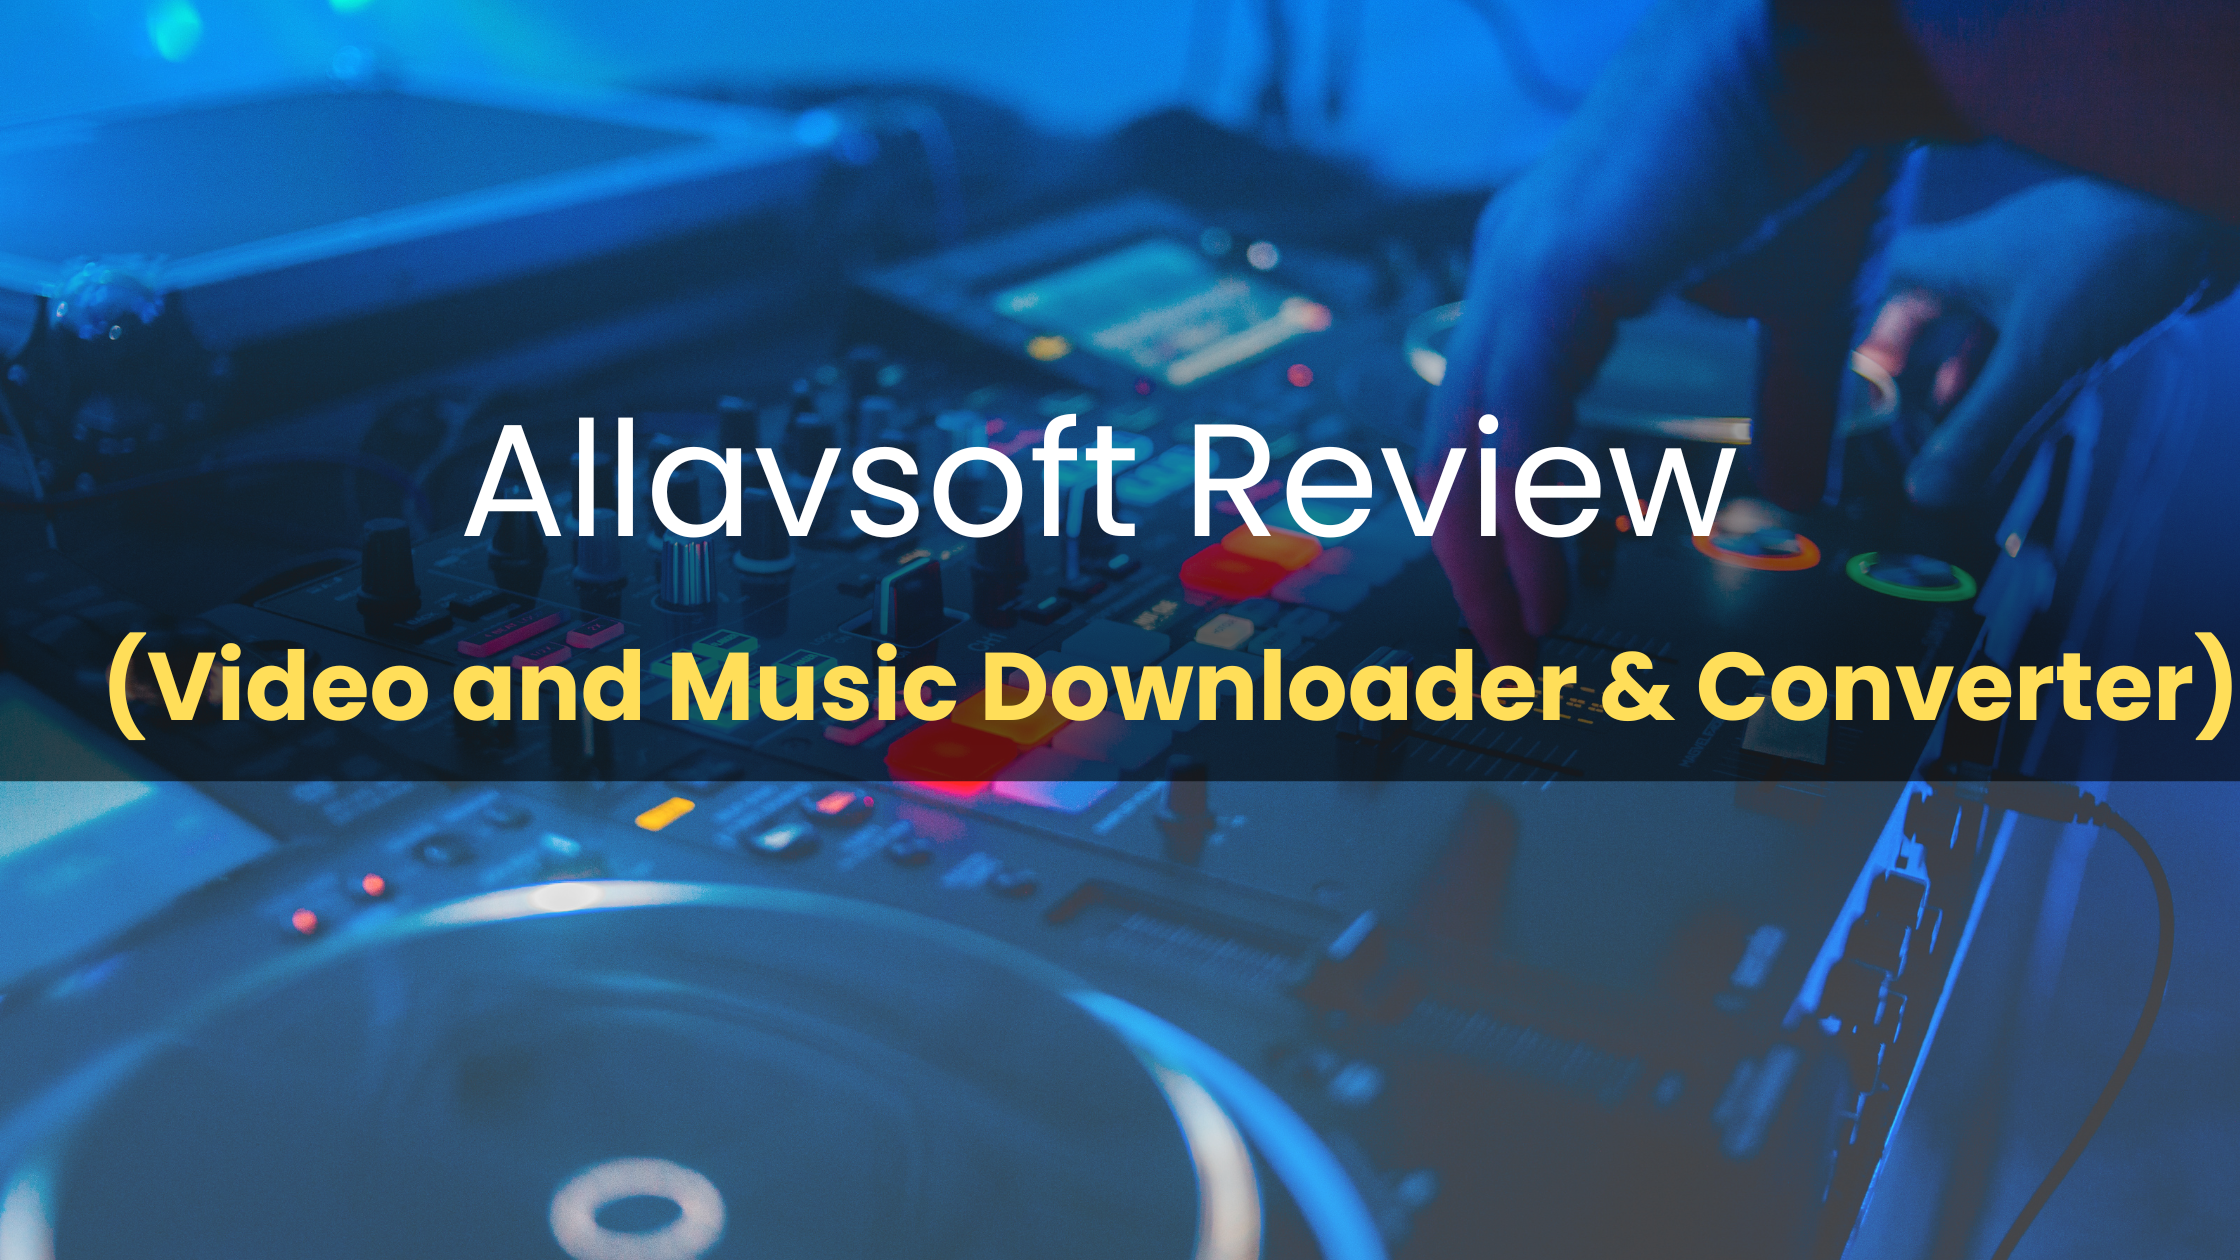 Allavsoft Review